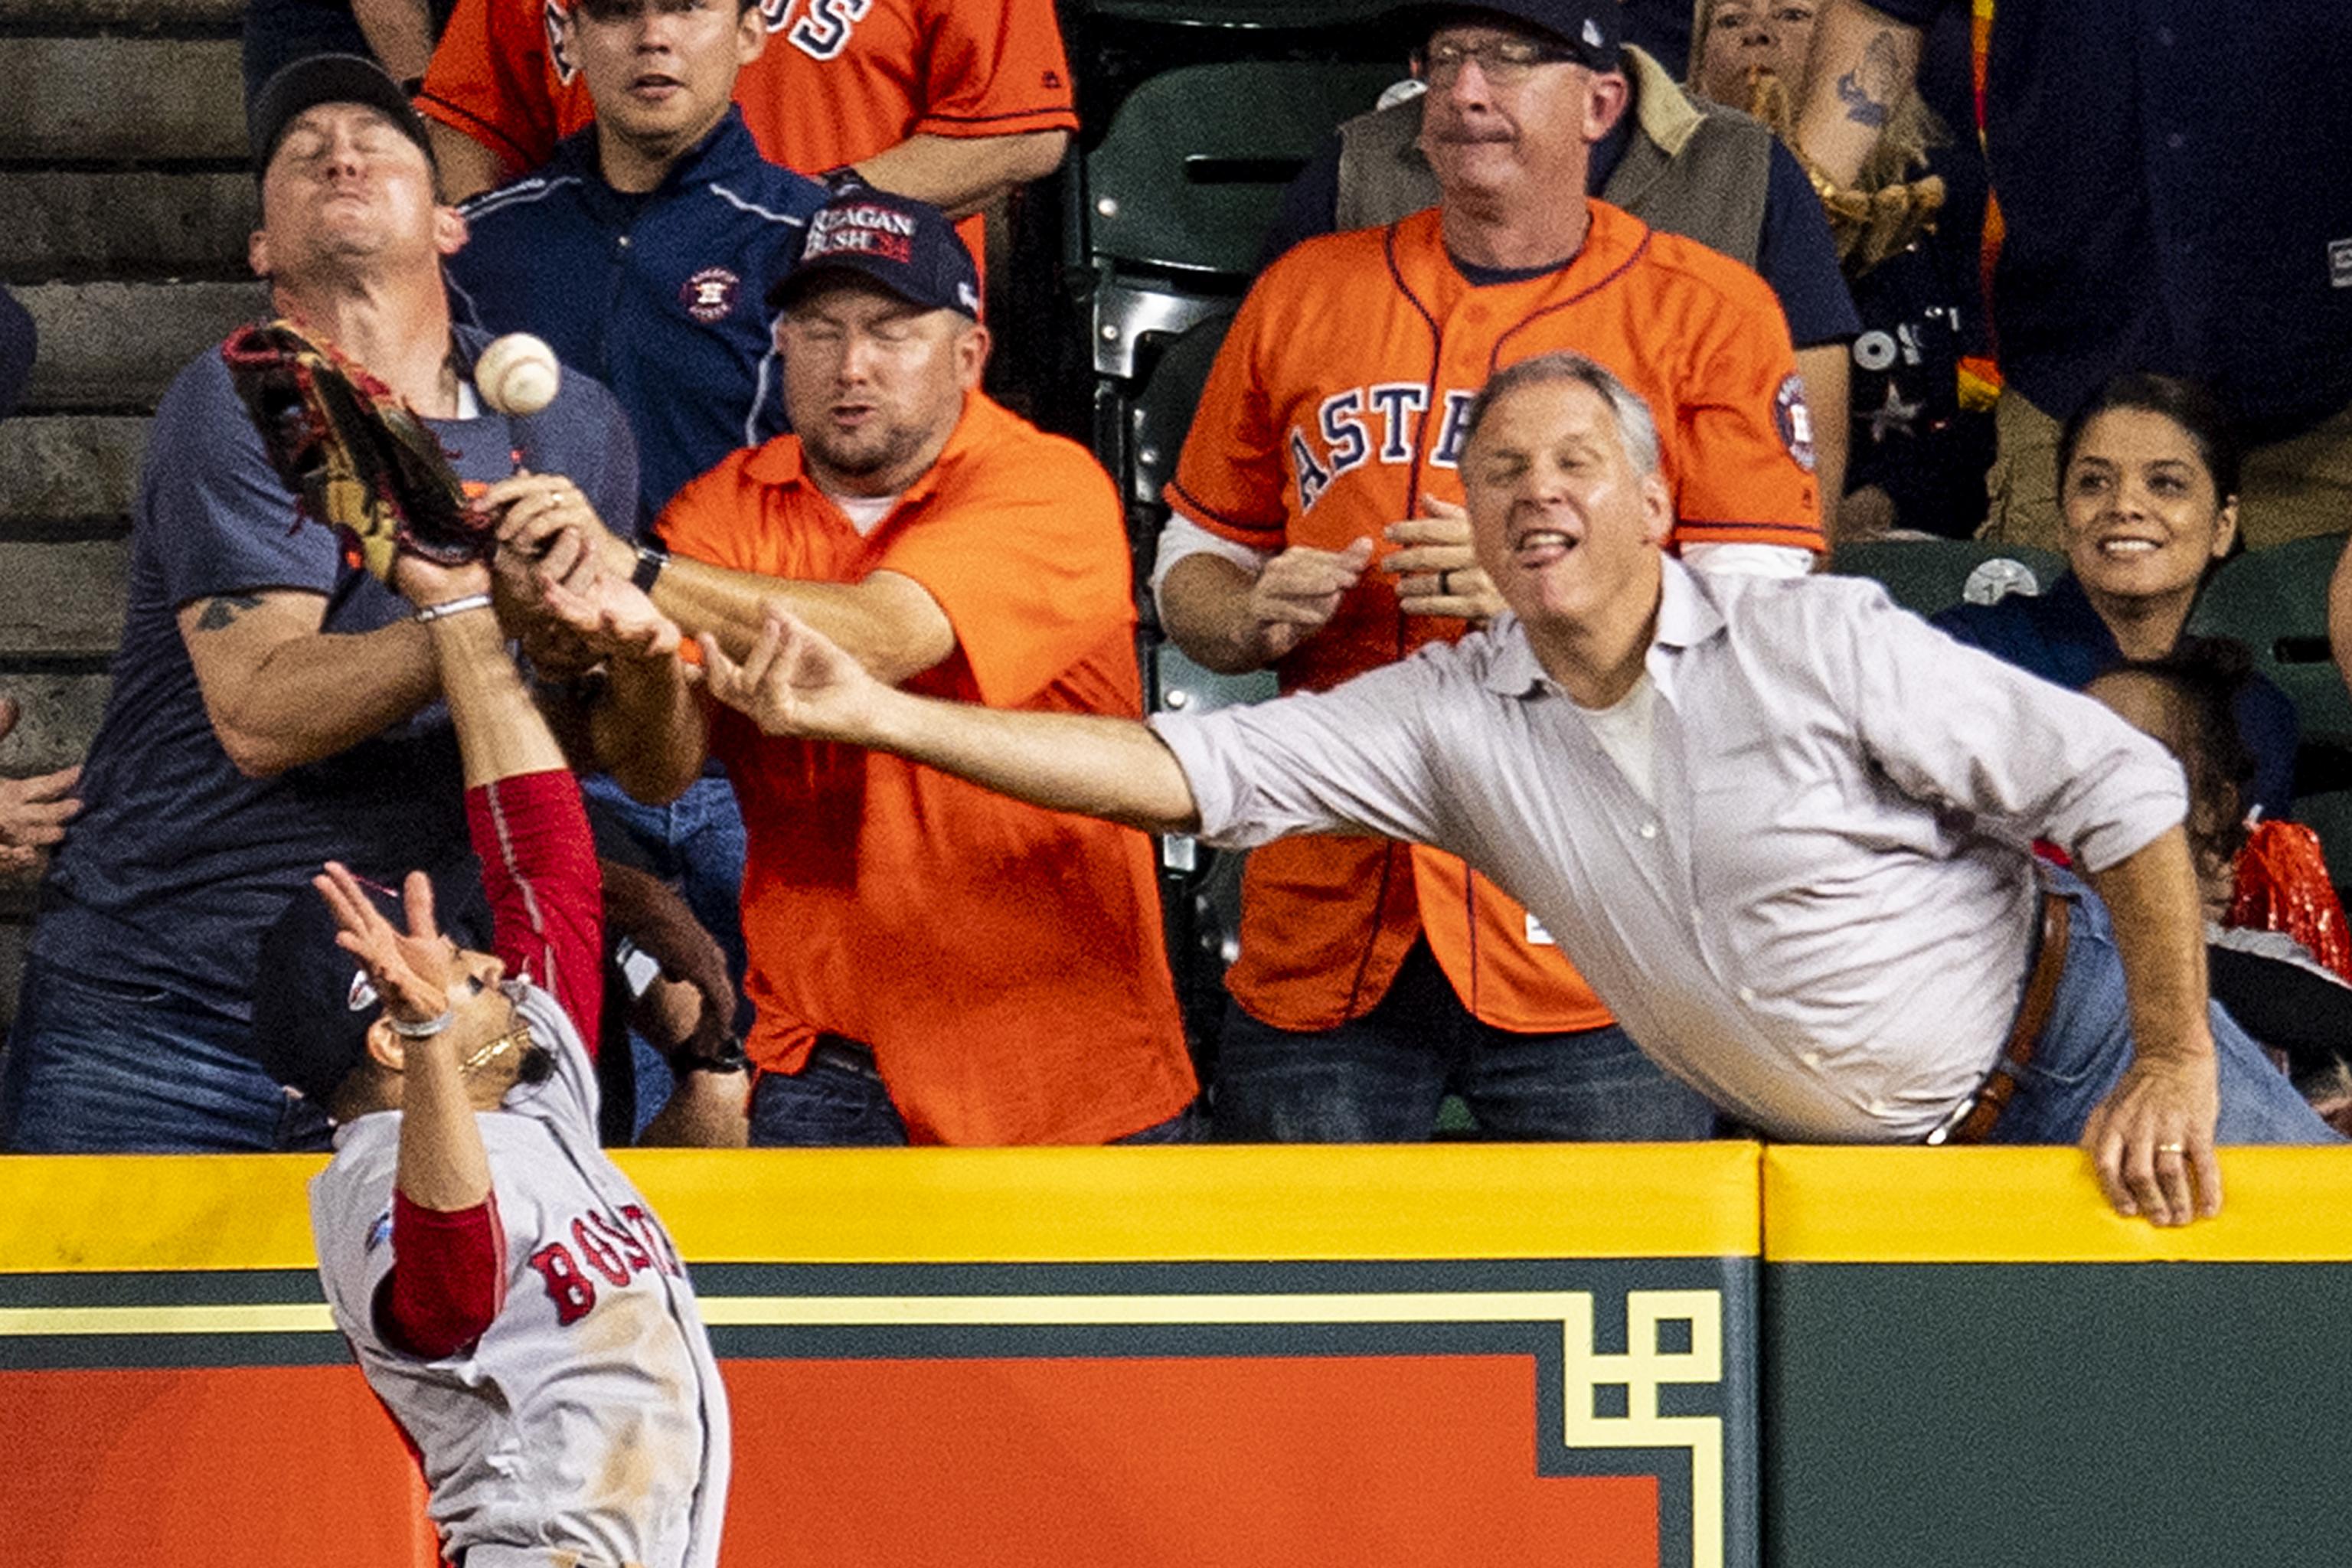 Fan interferes on possible Altuve HR in Astros 8-6 ALCS loss